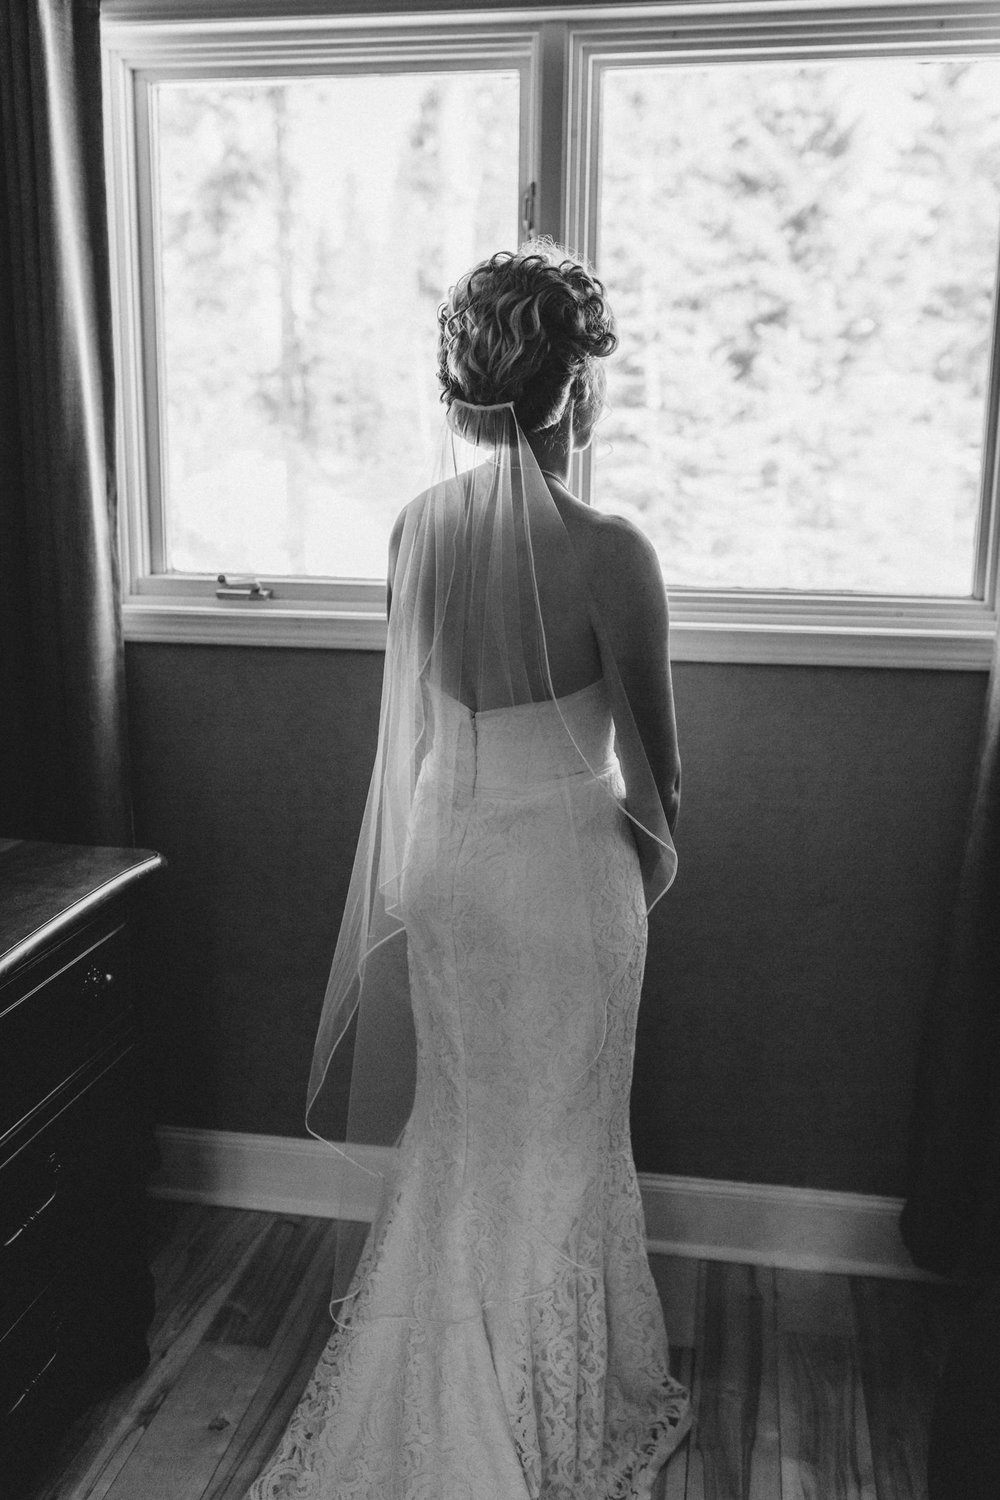 Portrait of bride looking out the window